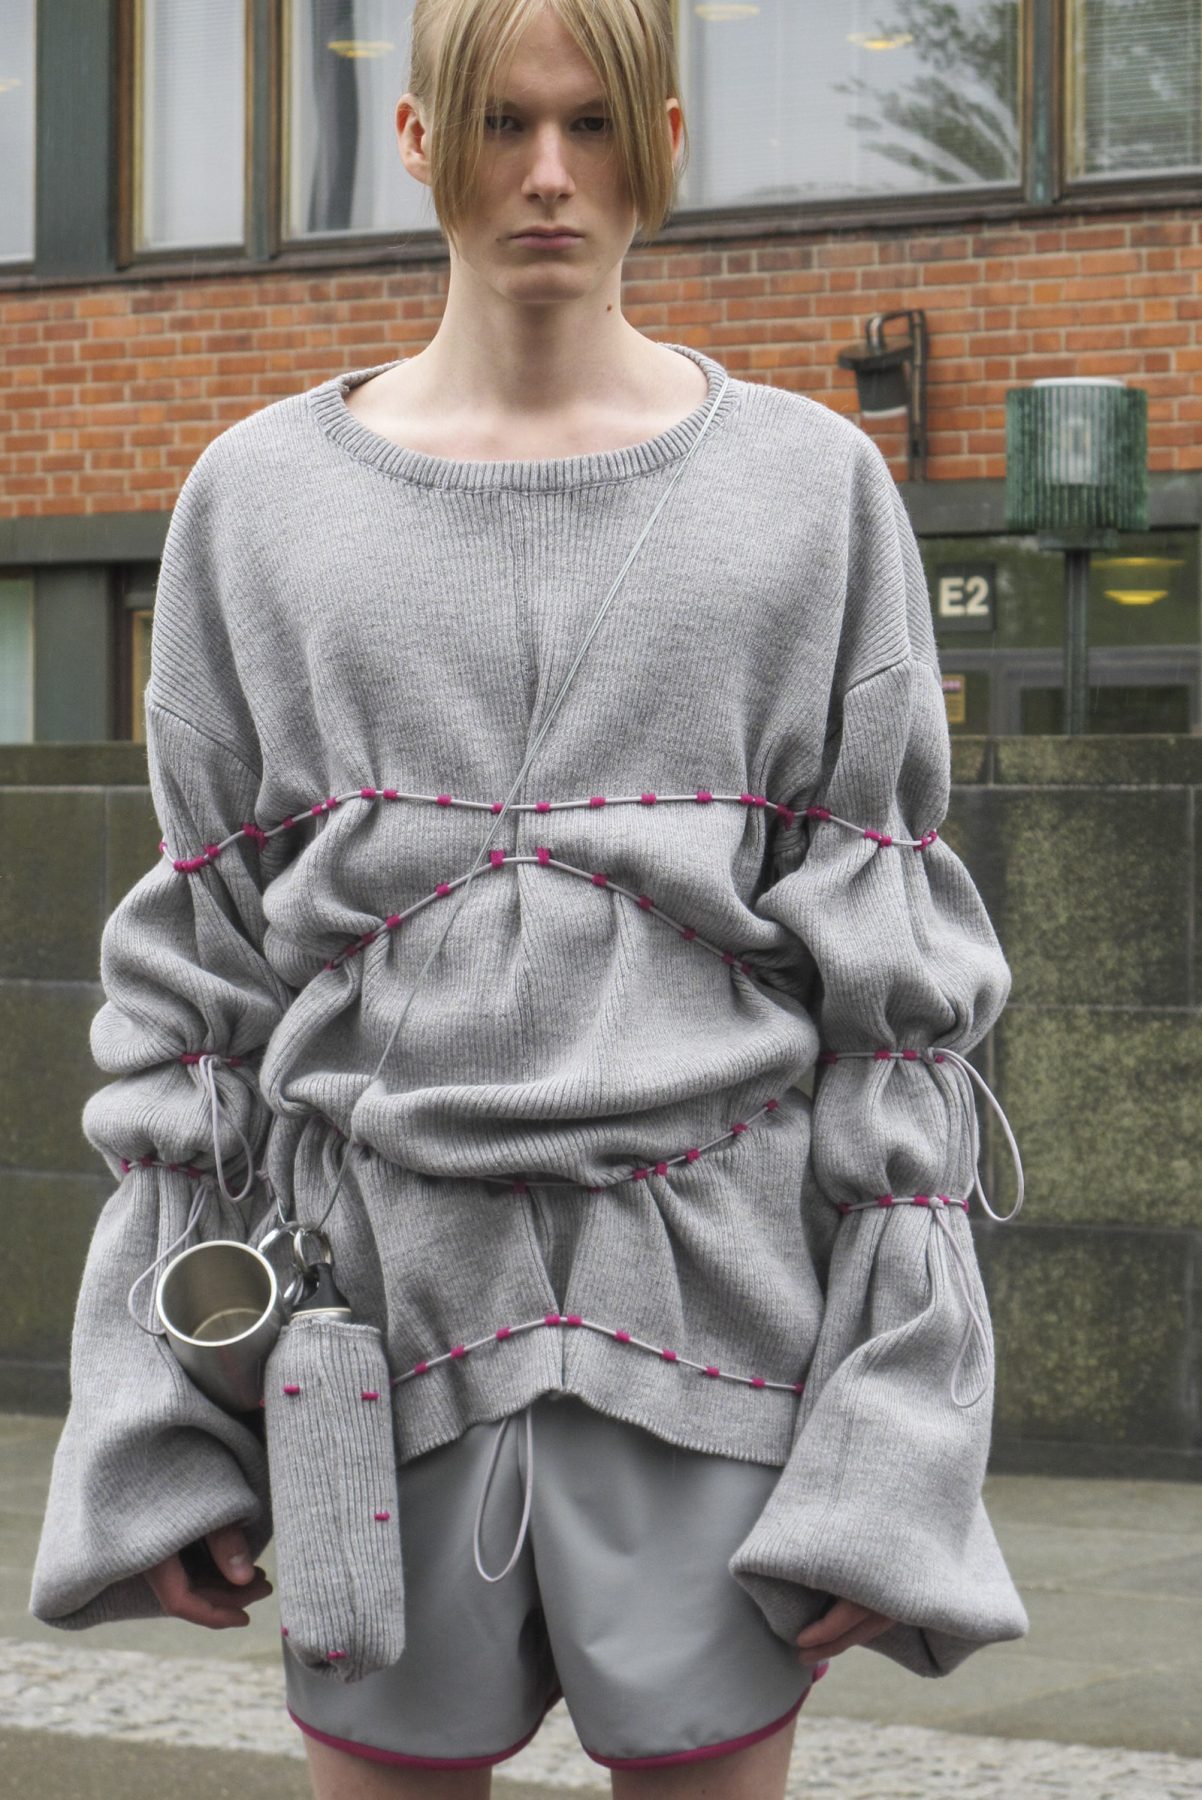 Photo of model wearing draped grey jumper with strings